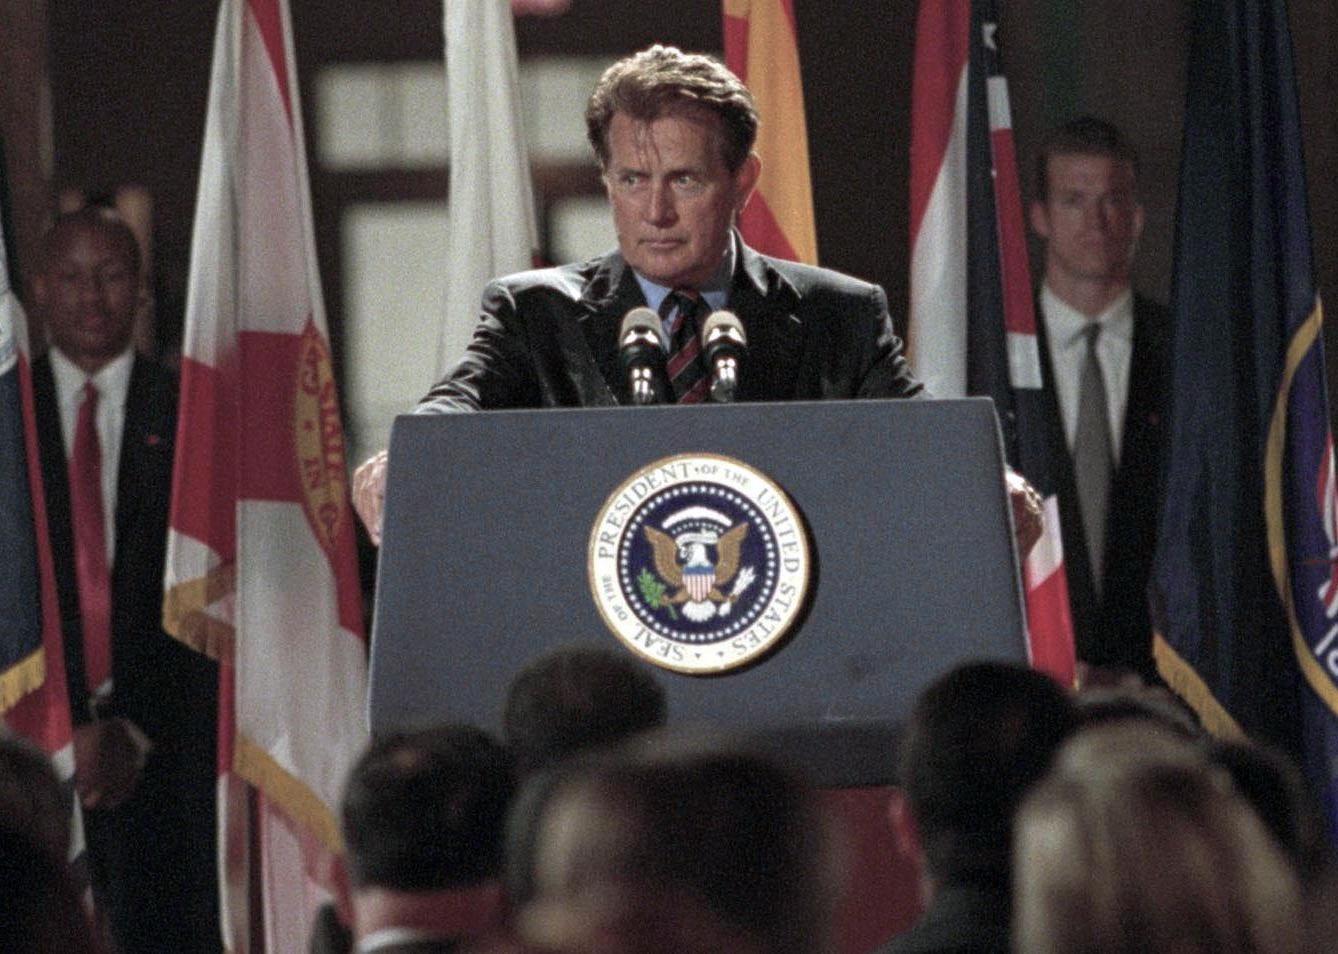 Martin Sheen in front of the presidential podium.